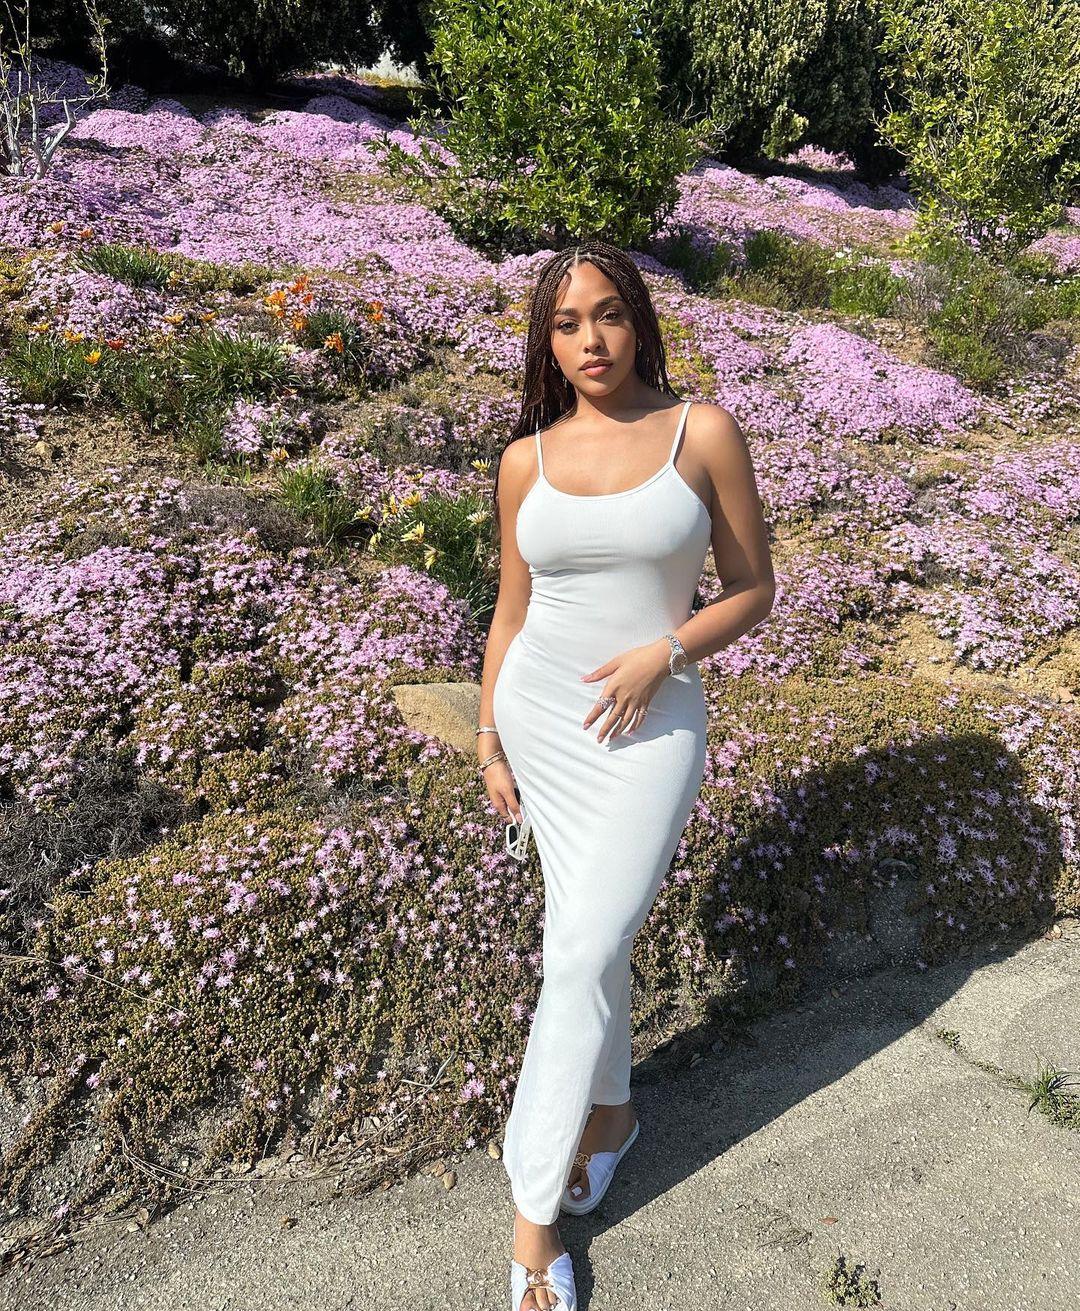 Jordyn Woods' Alluring Curves Draws Attention In THIS Simple Summer Dress